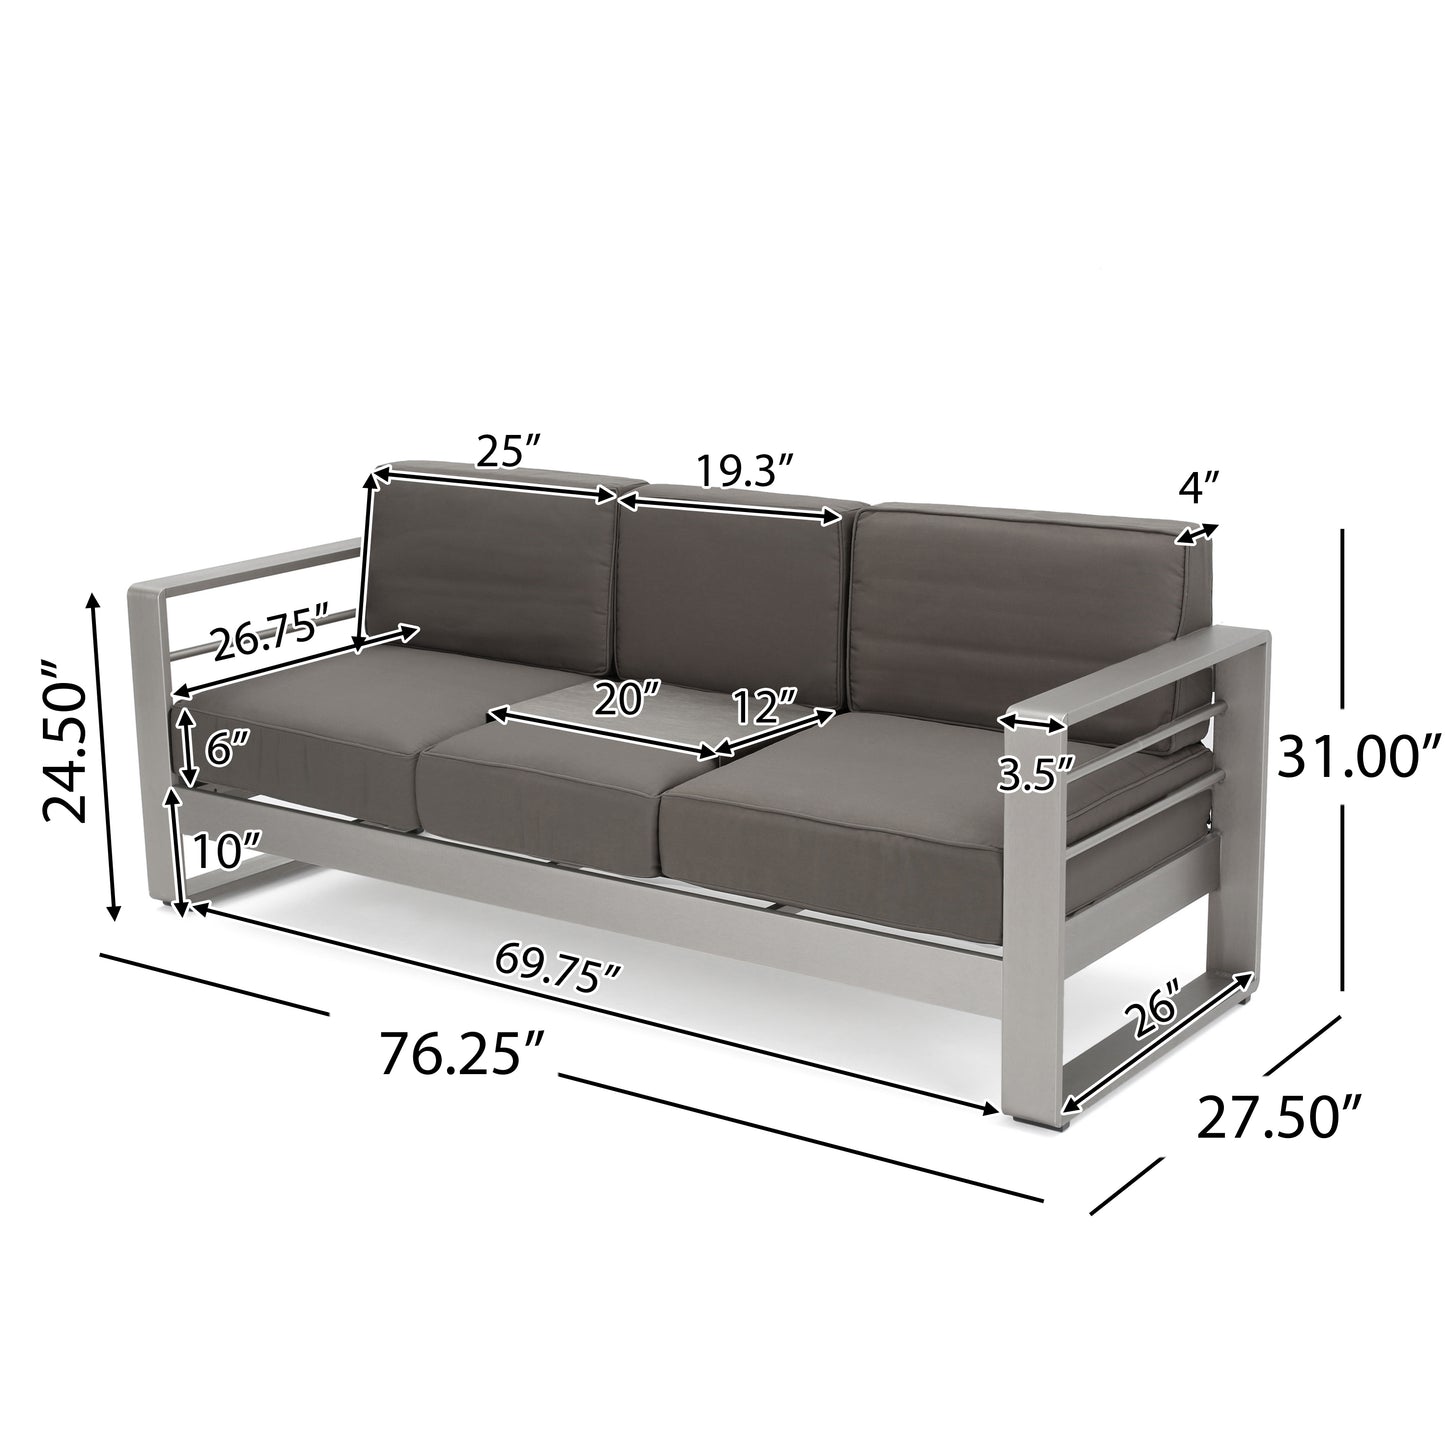 Stacy Outdoor 3 Seater Aluminum Sofa and Ottoman Set with Side Tables